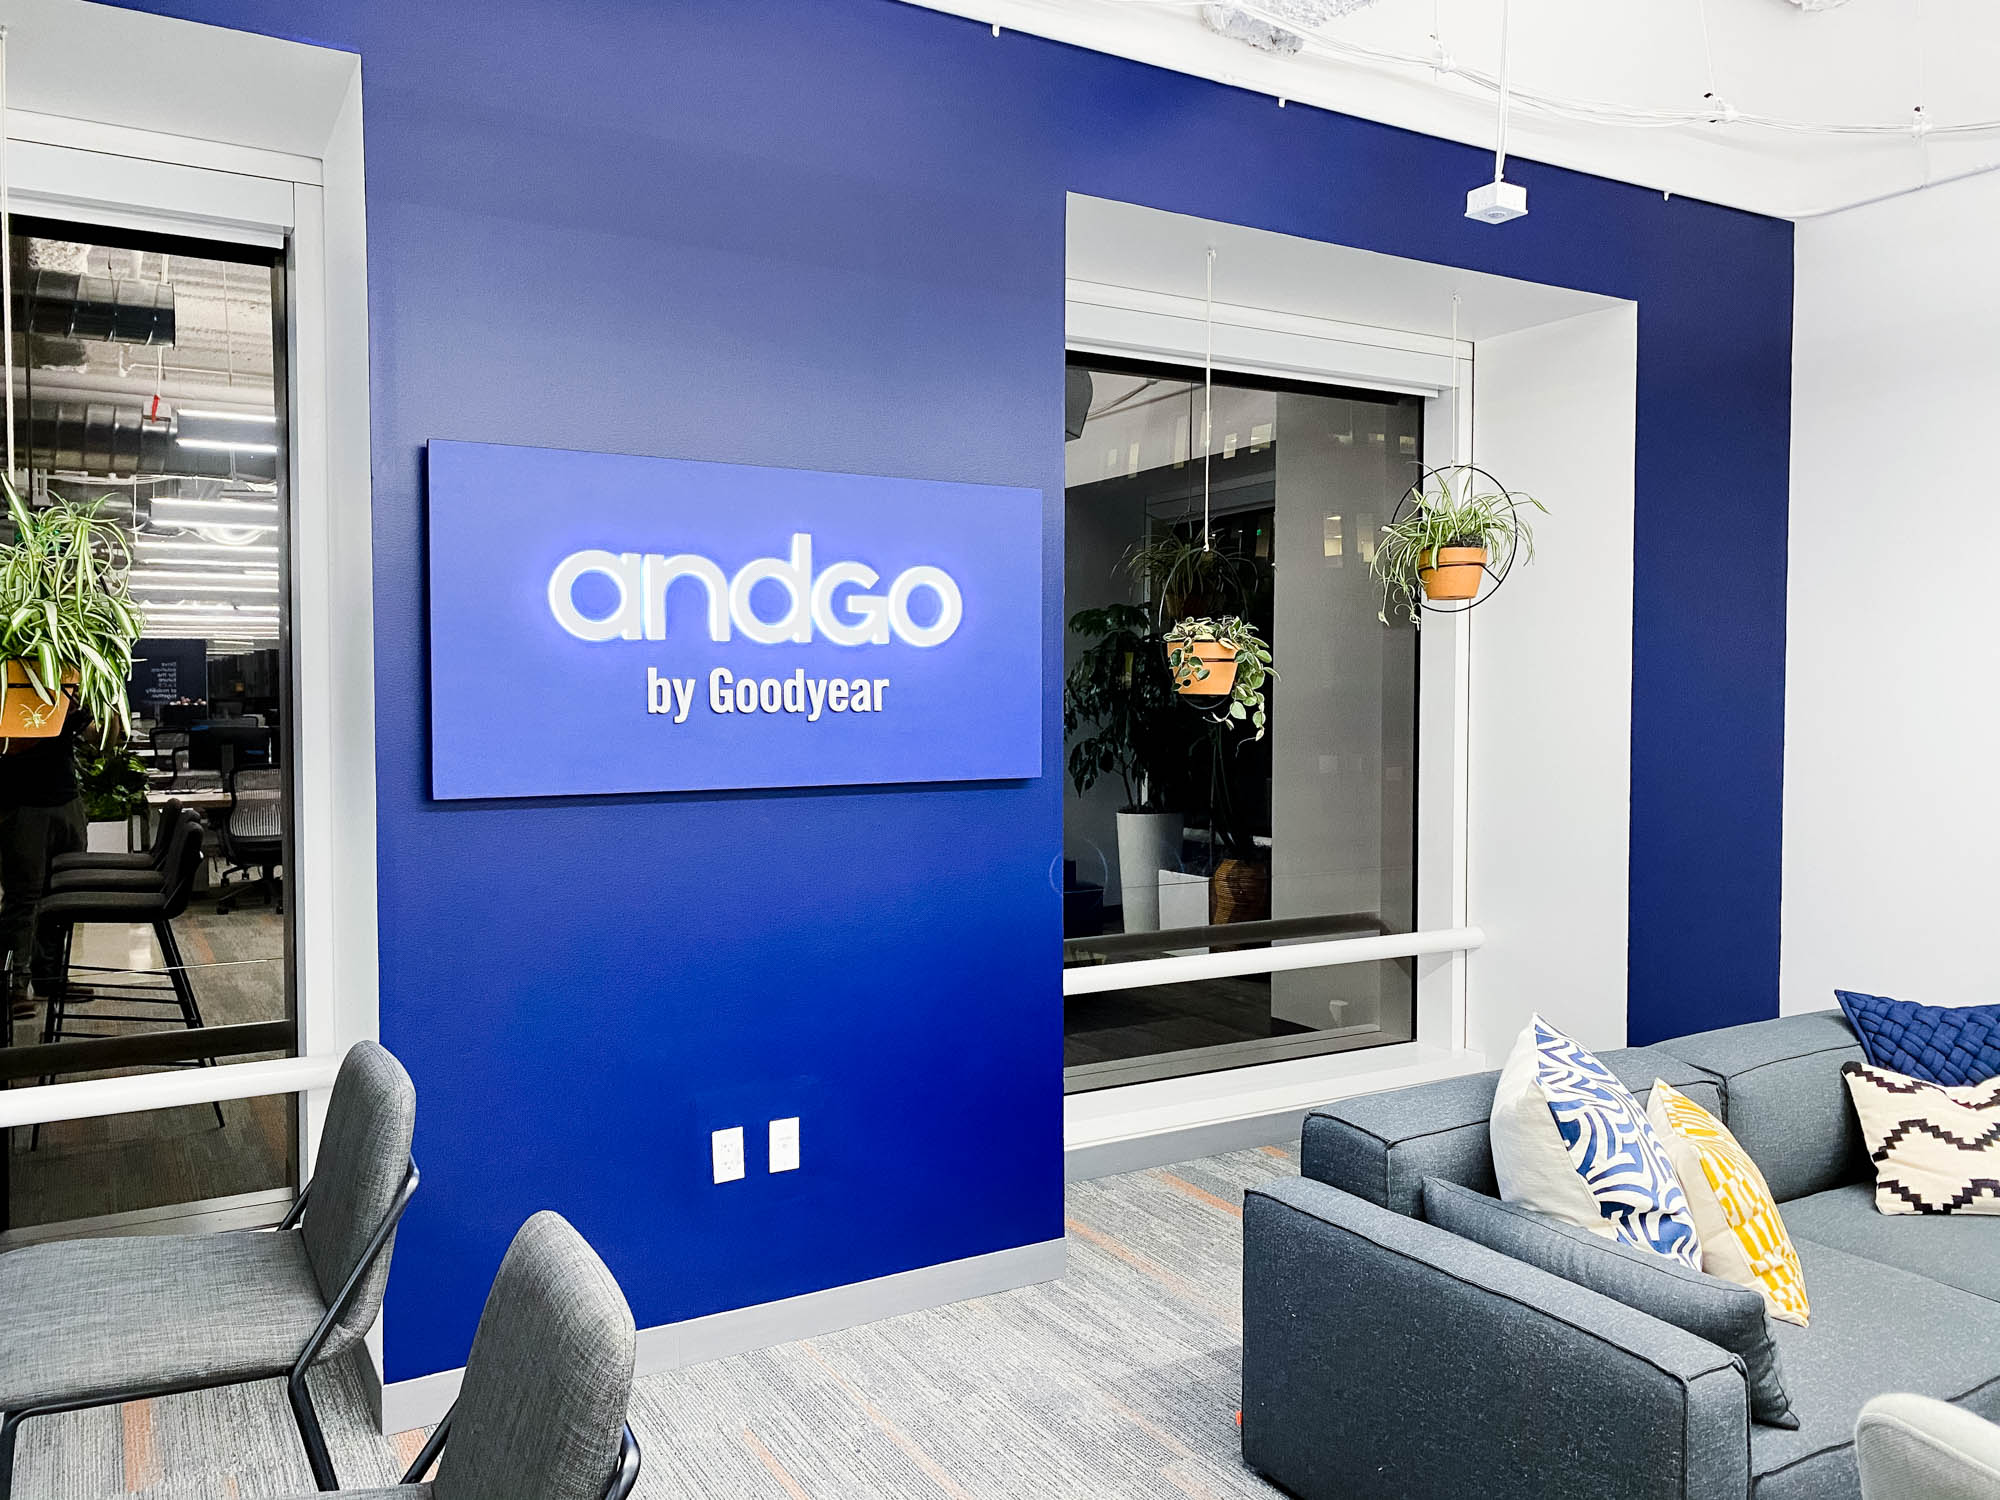 Illuminated, blue, edge-lit sign for the San Francisco office of andgo by Goodyear, a seamless vehicle-servicing platform designed to help consumer fleets monitor their service needs and improve their scheduling.